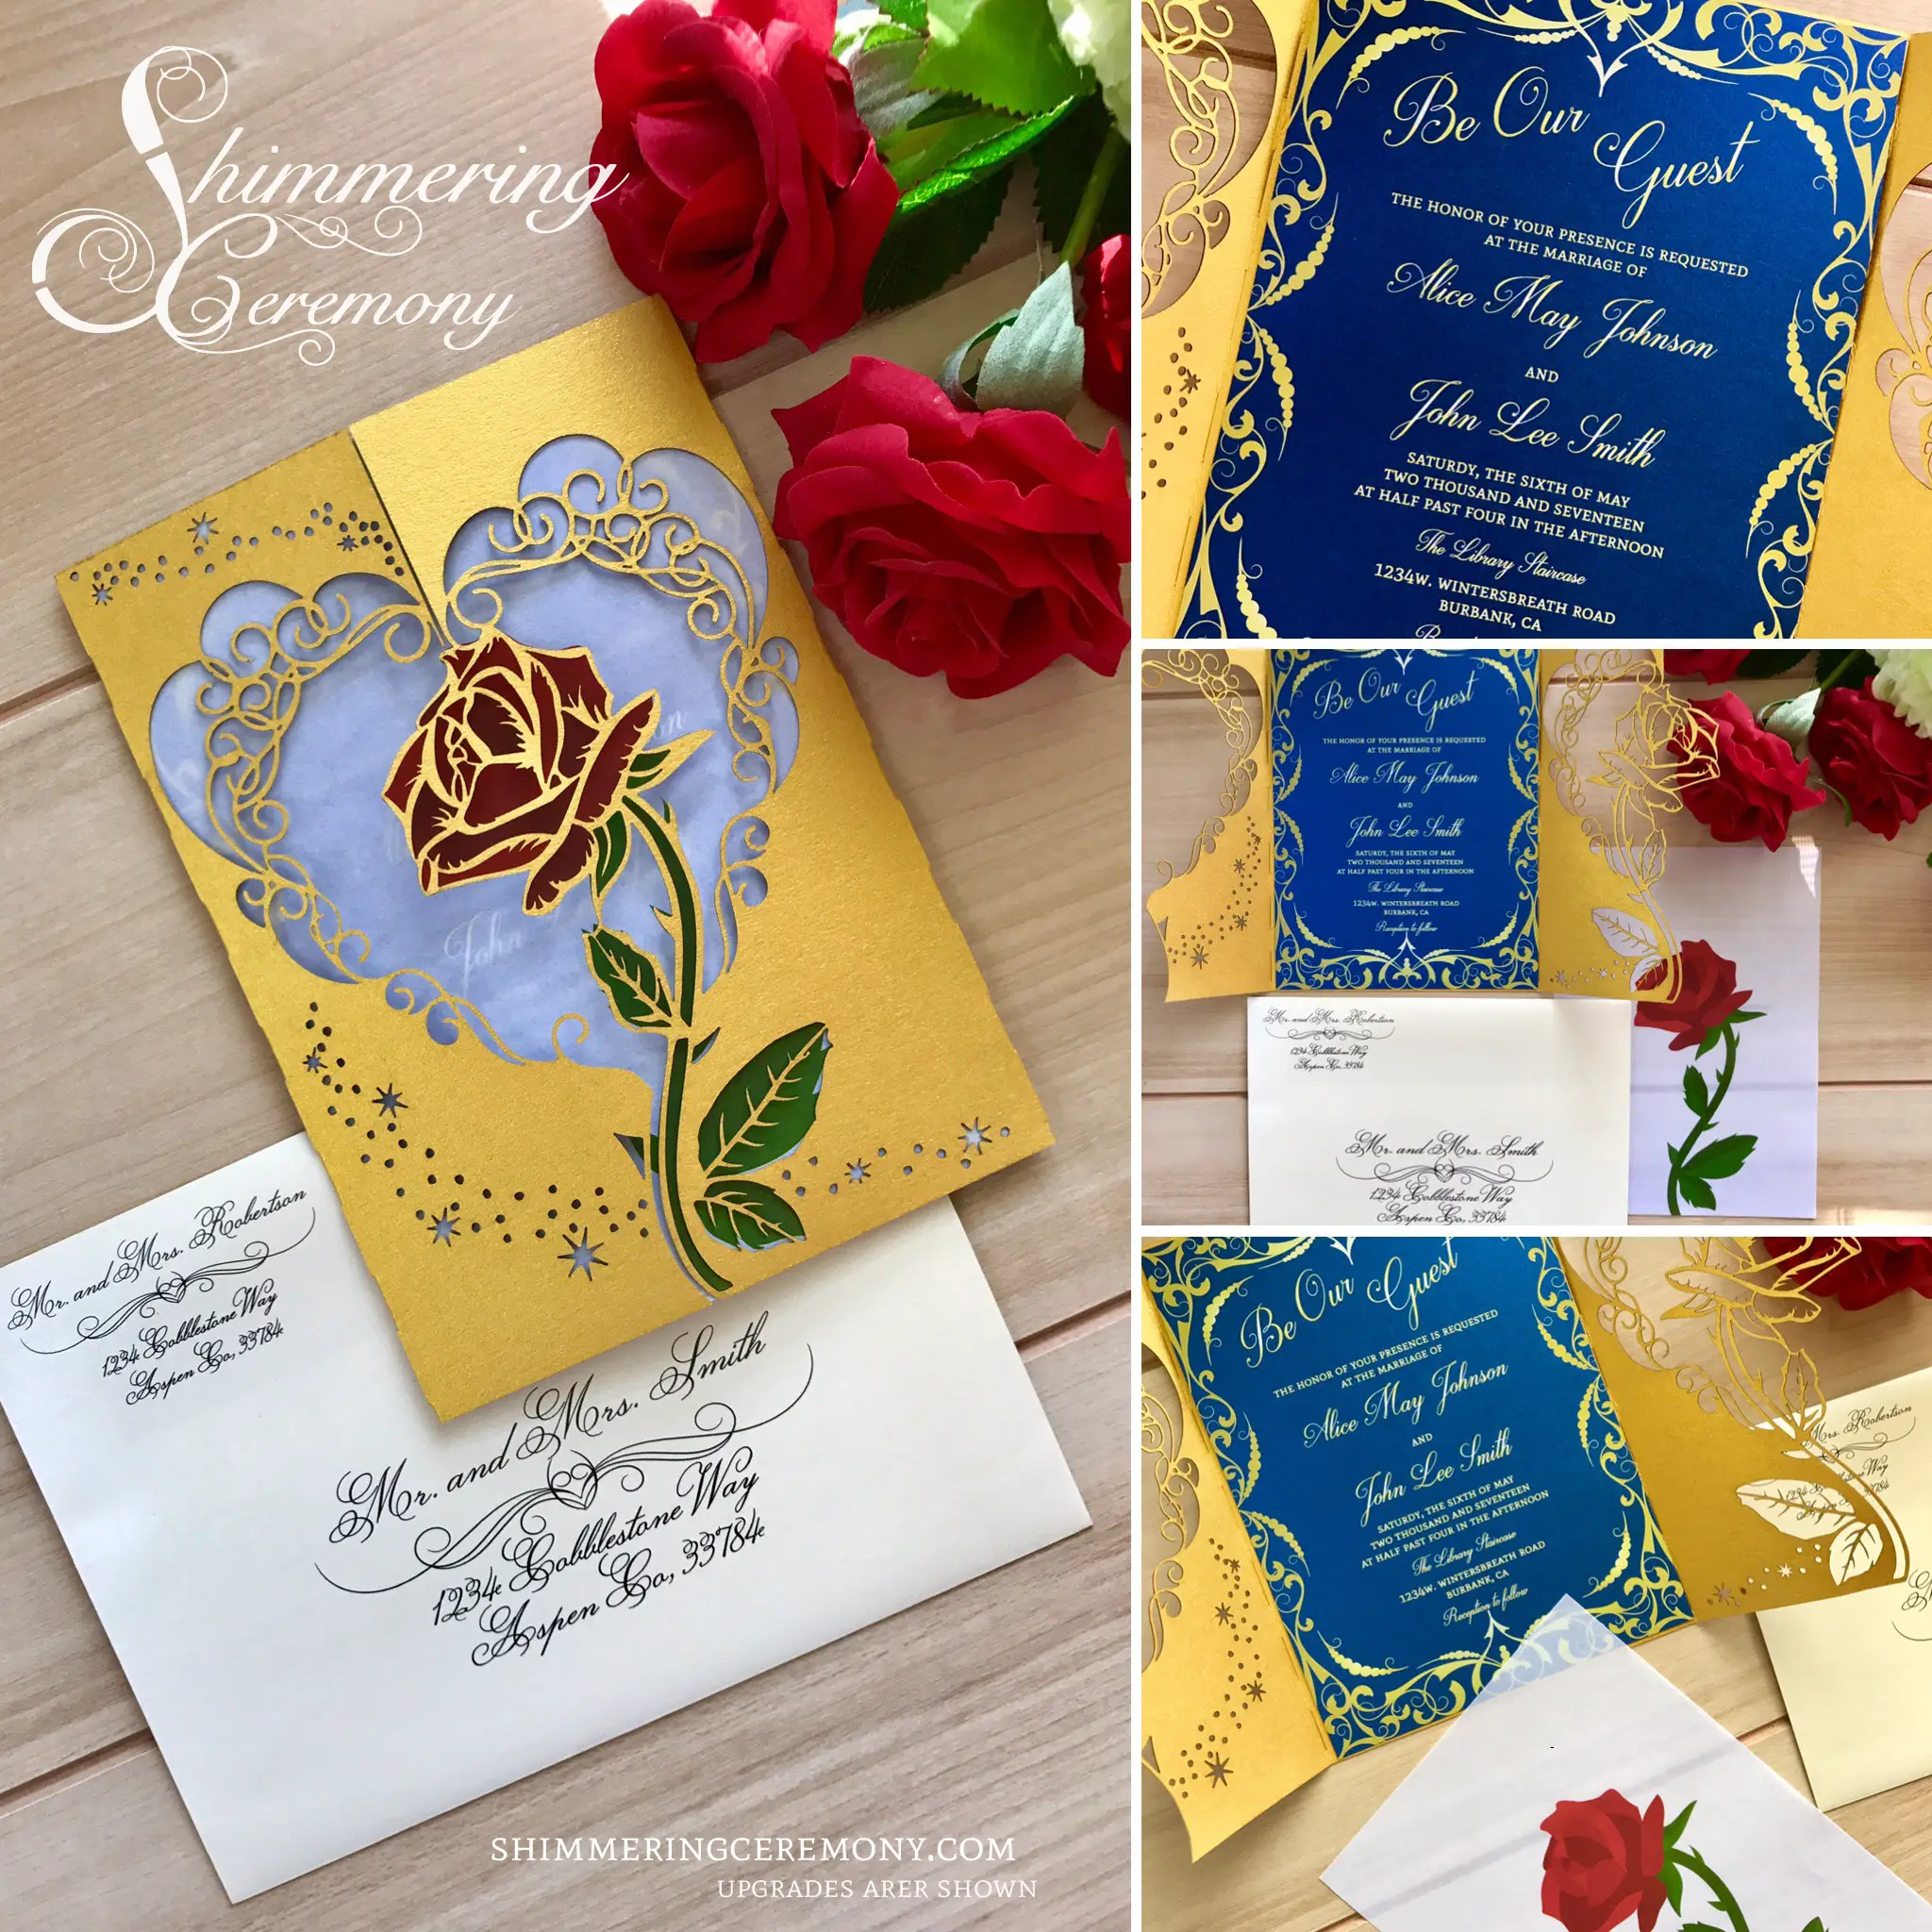 Beauty and the beast inspired wedding invitation laser rose and magic ...